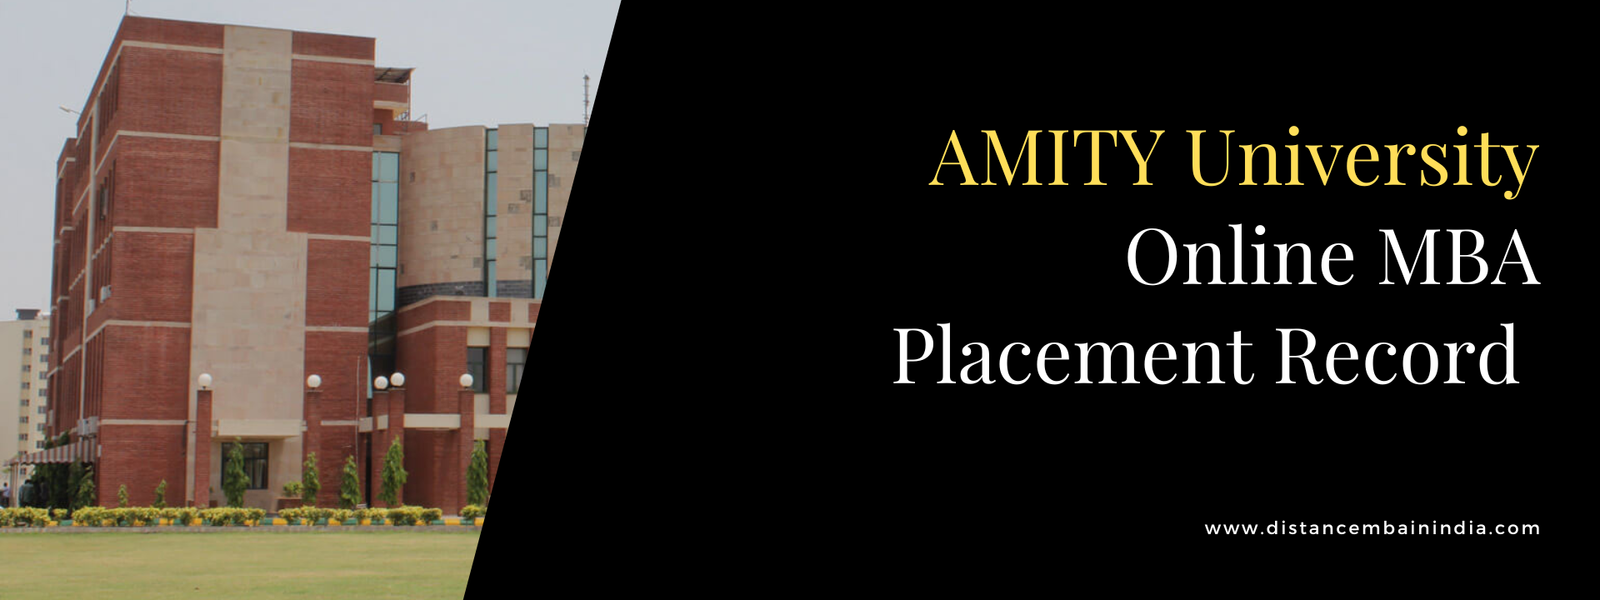 Amity University Online MBA Placement Record